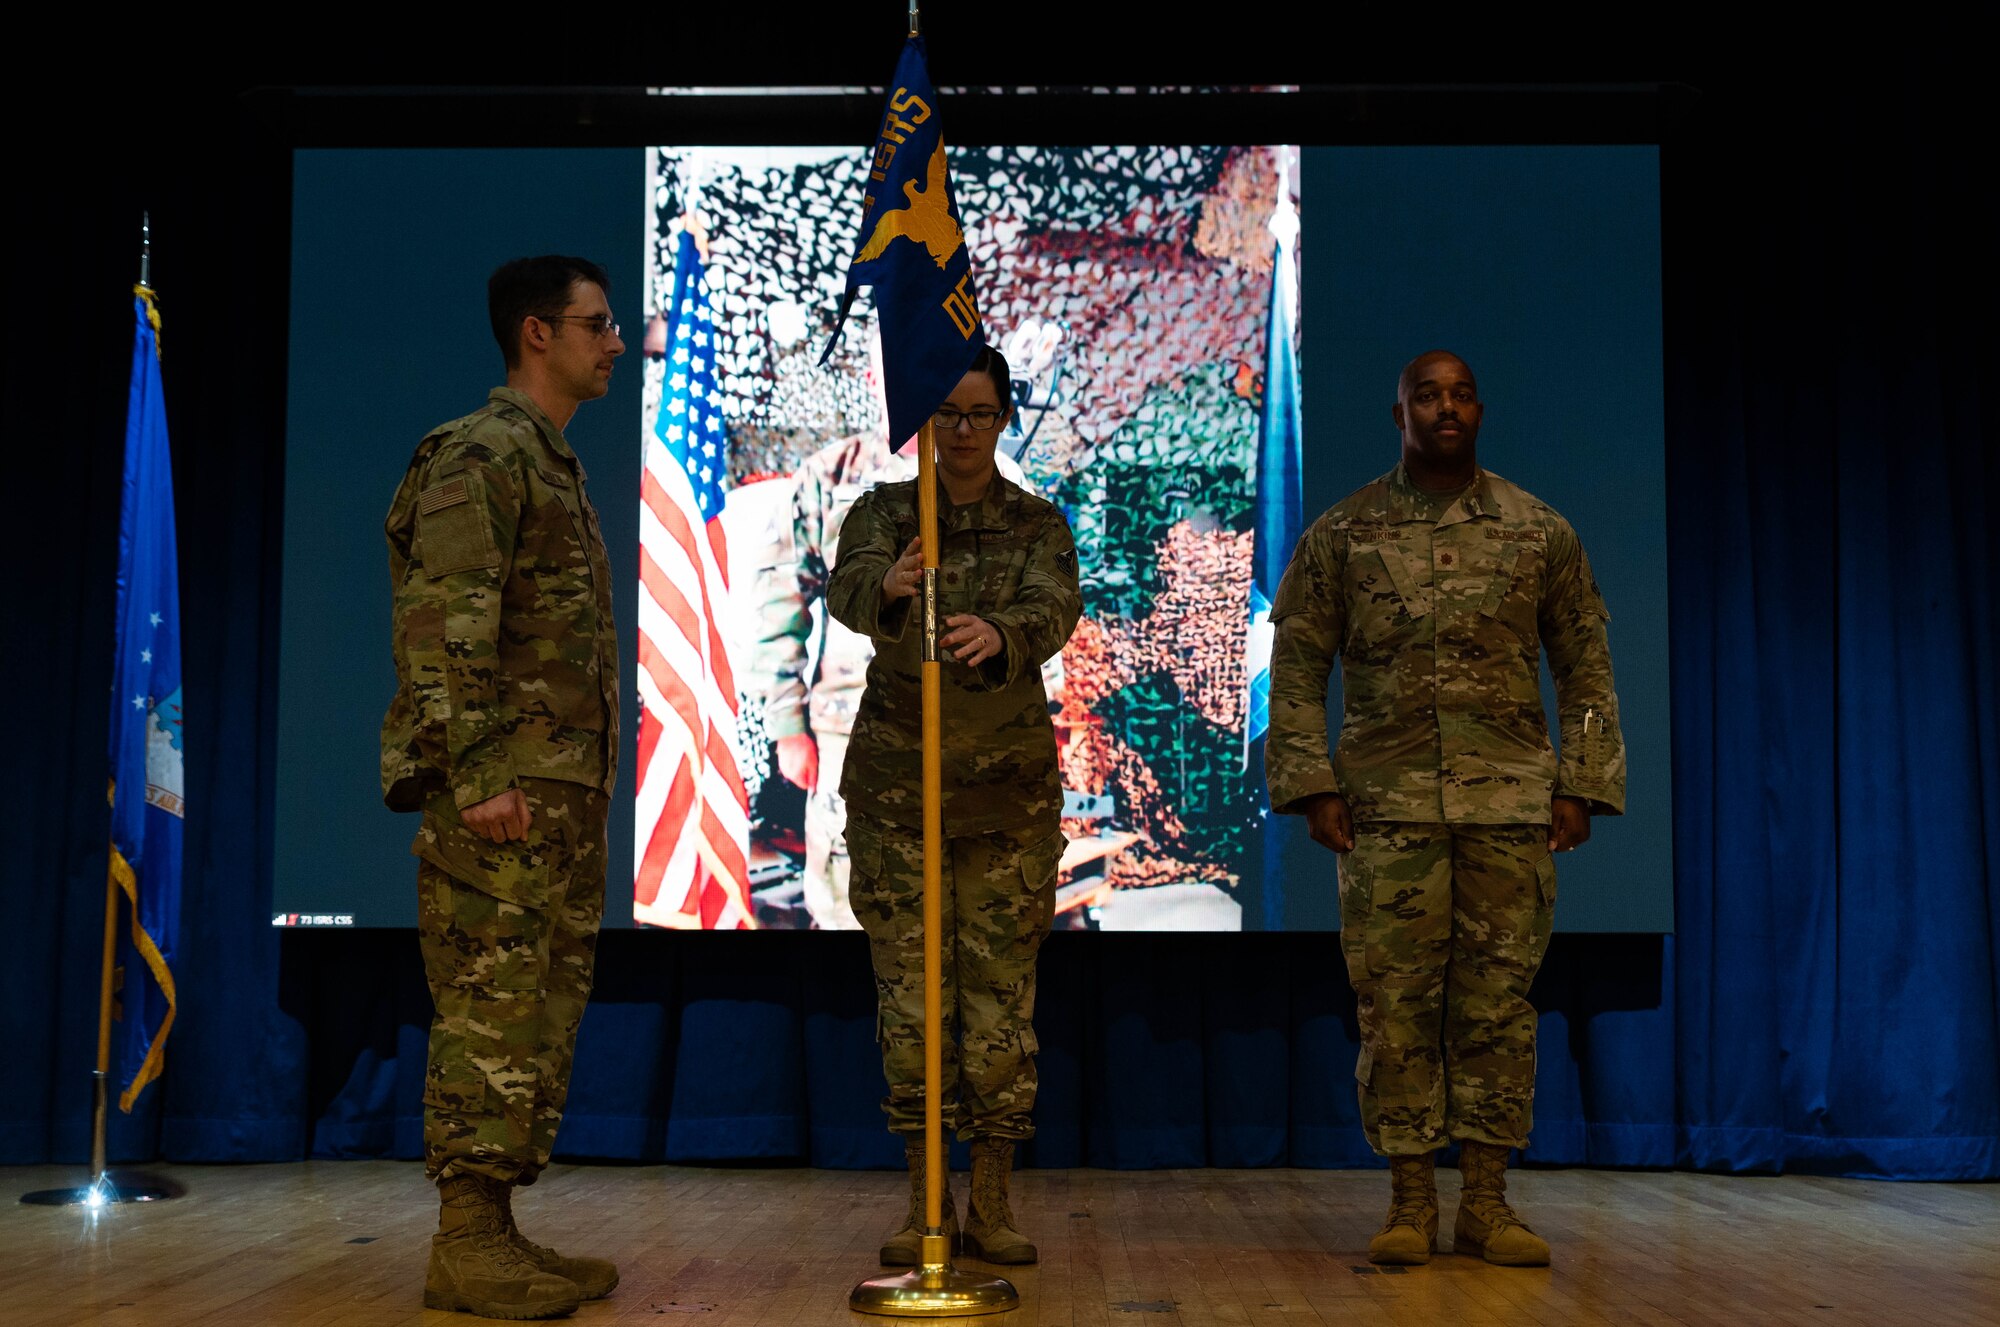 The 73rd Intelligence, Surveillance, and Reconnaissance Squadron Detachment 2 held a change of command ceremony at Osan Air Base, Republic of Korea, June 30, 2021. Maj. Rachel Johnston transferred command of the 73rd ISRS Det 2 to Maj. Kenneth Jenkins II.